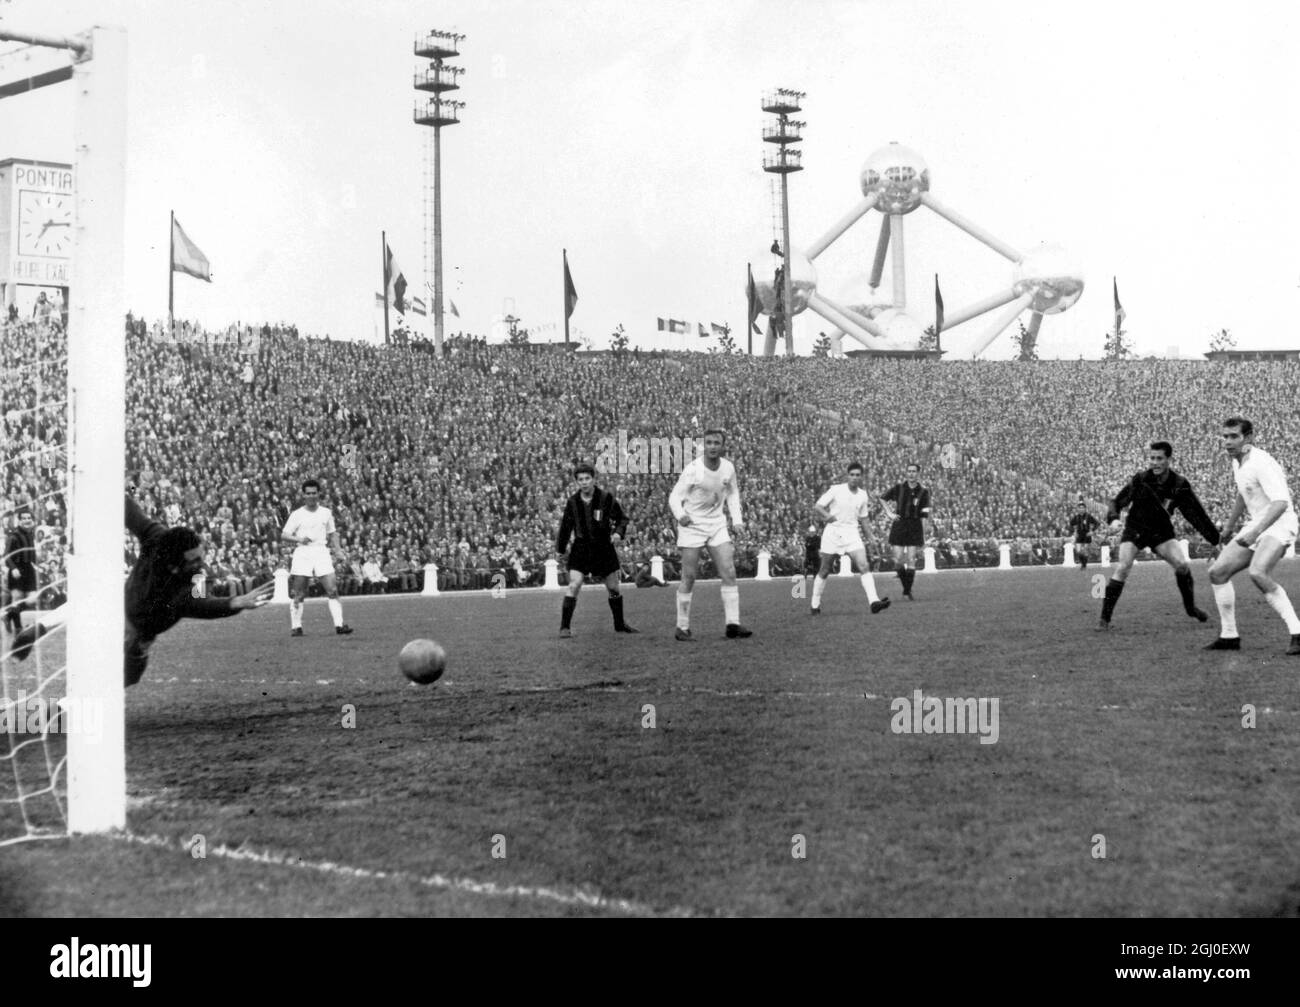 Real Madrid became European Football Champions once again when they beat Milan at Heysel Stadium, Brussels 3-2. Real Madrid goalkeeper Alonso dives at a shot from Milan centre forward Schiaffino who scored in the second half, and is pictured second from right. The Atomium, centre-piece of the Brussels Fair can be seen in the background. 29th May 1958. Stock Photo